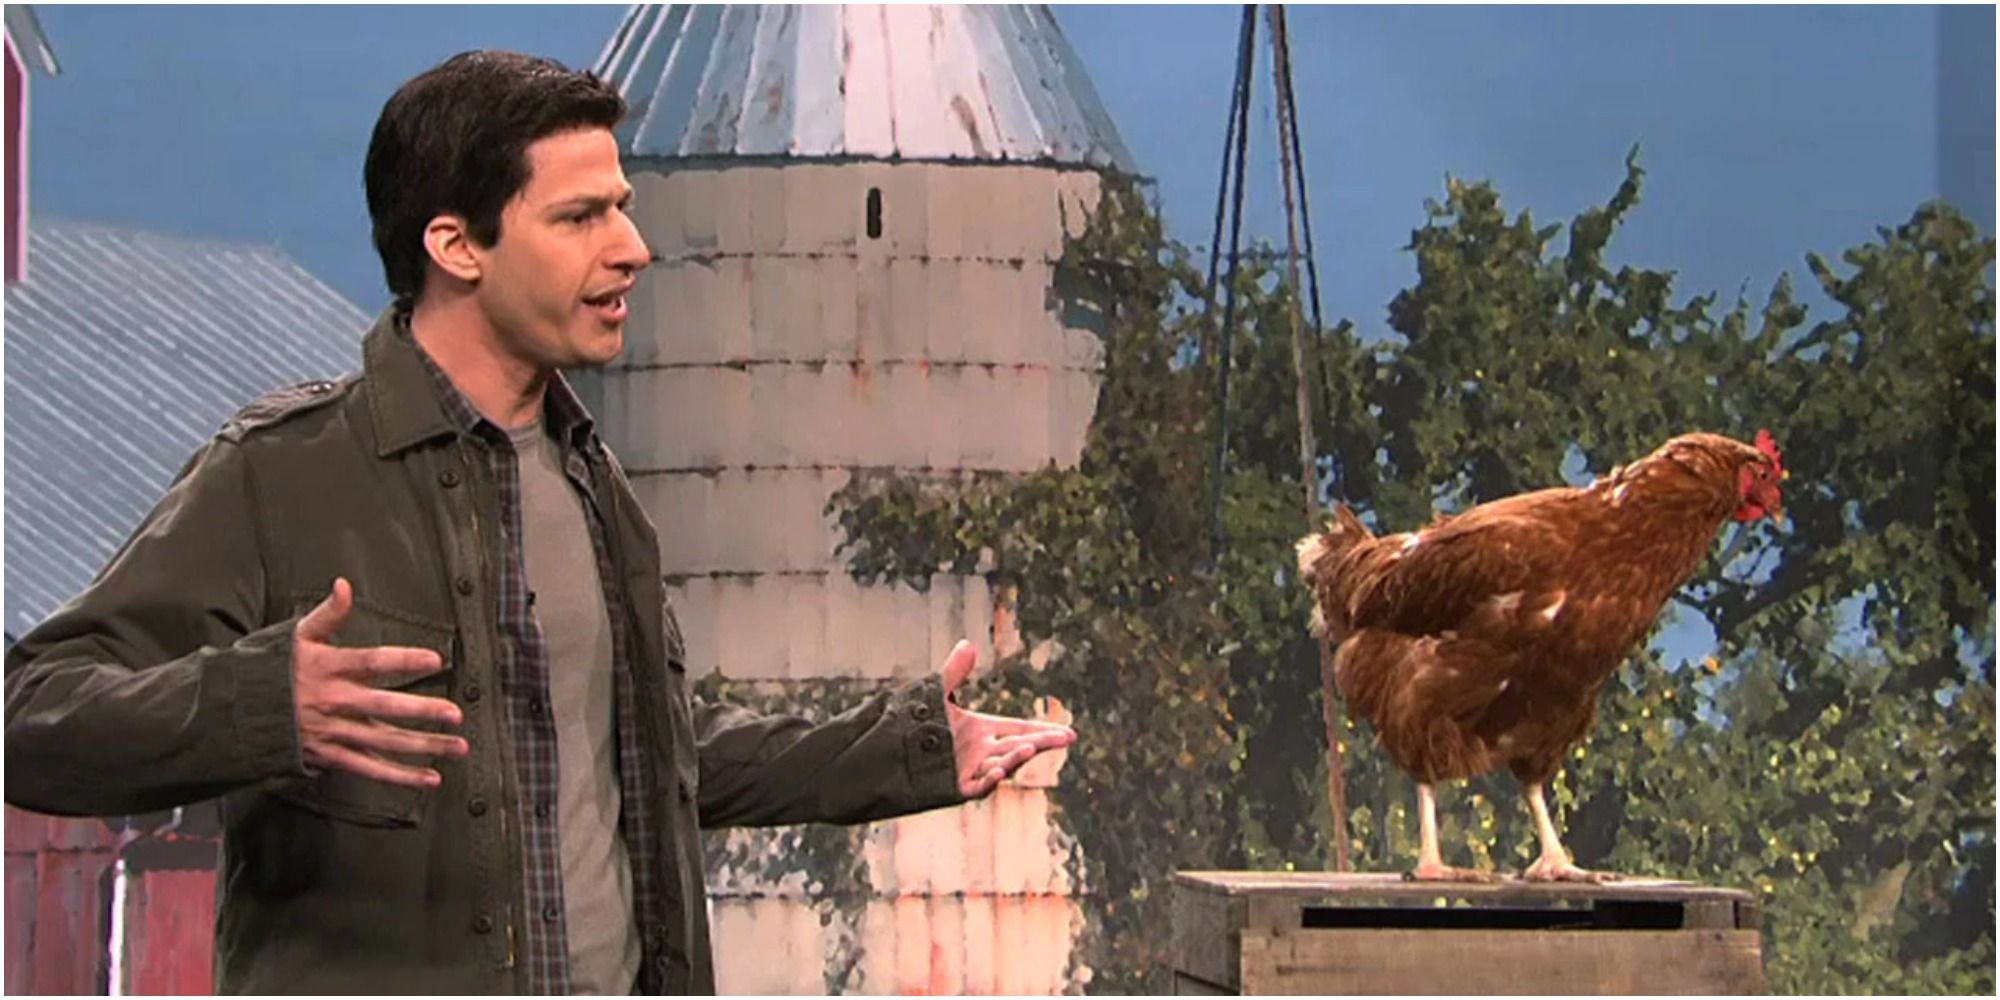 A screenshot of Andy Samberg's Mark Wahlberg talking to a chicken in Saturday Night Live